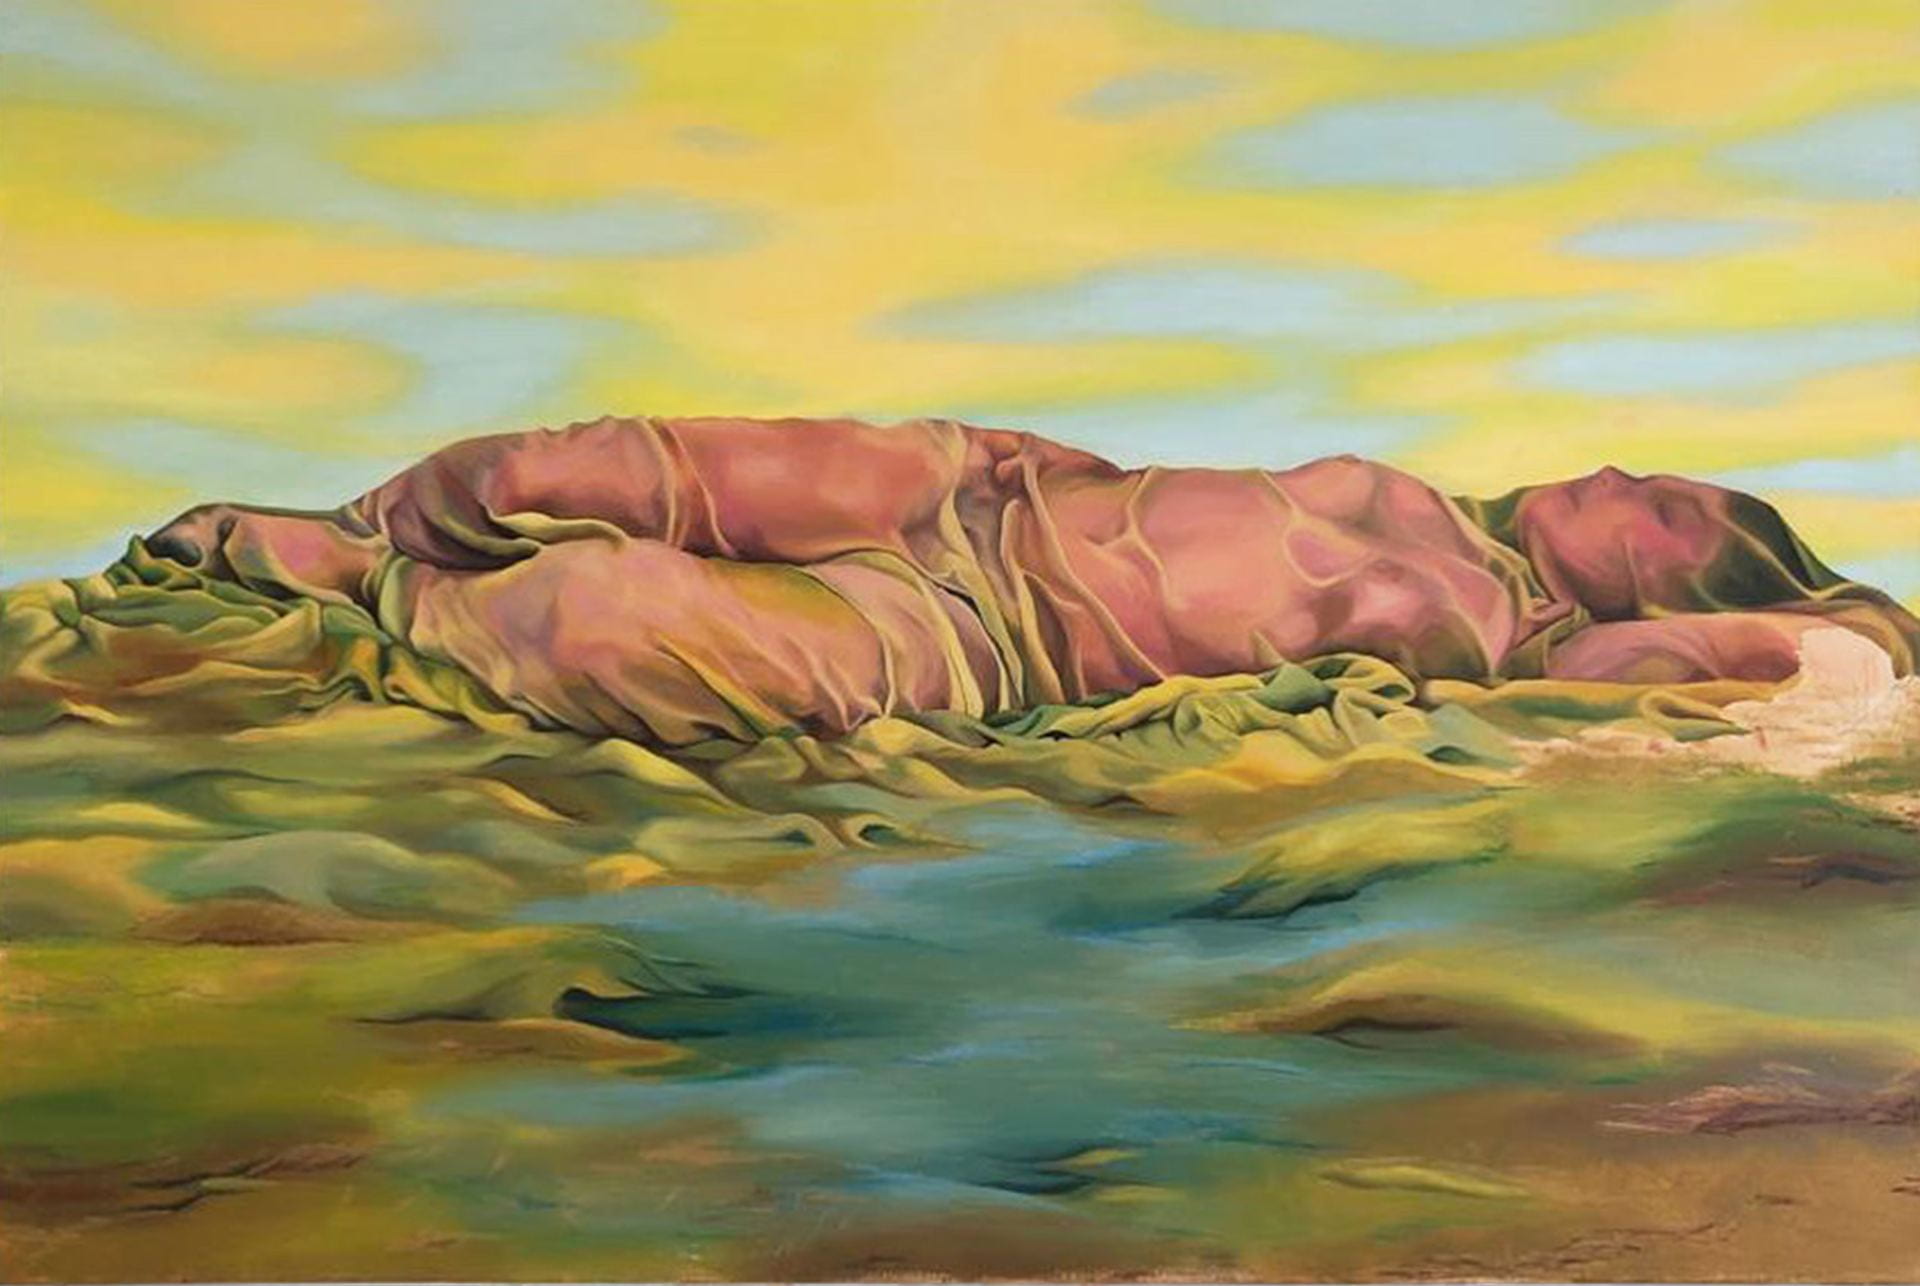 A painting of a sleeping figure lying on and merging into a green landscape.